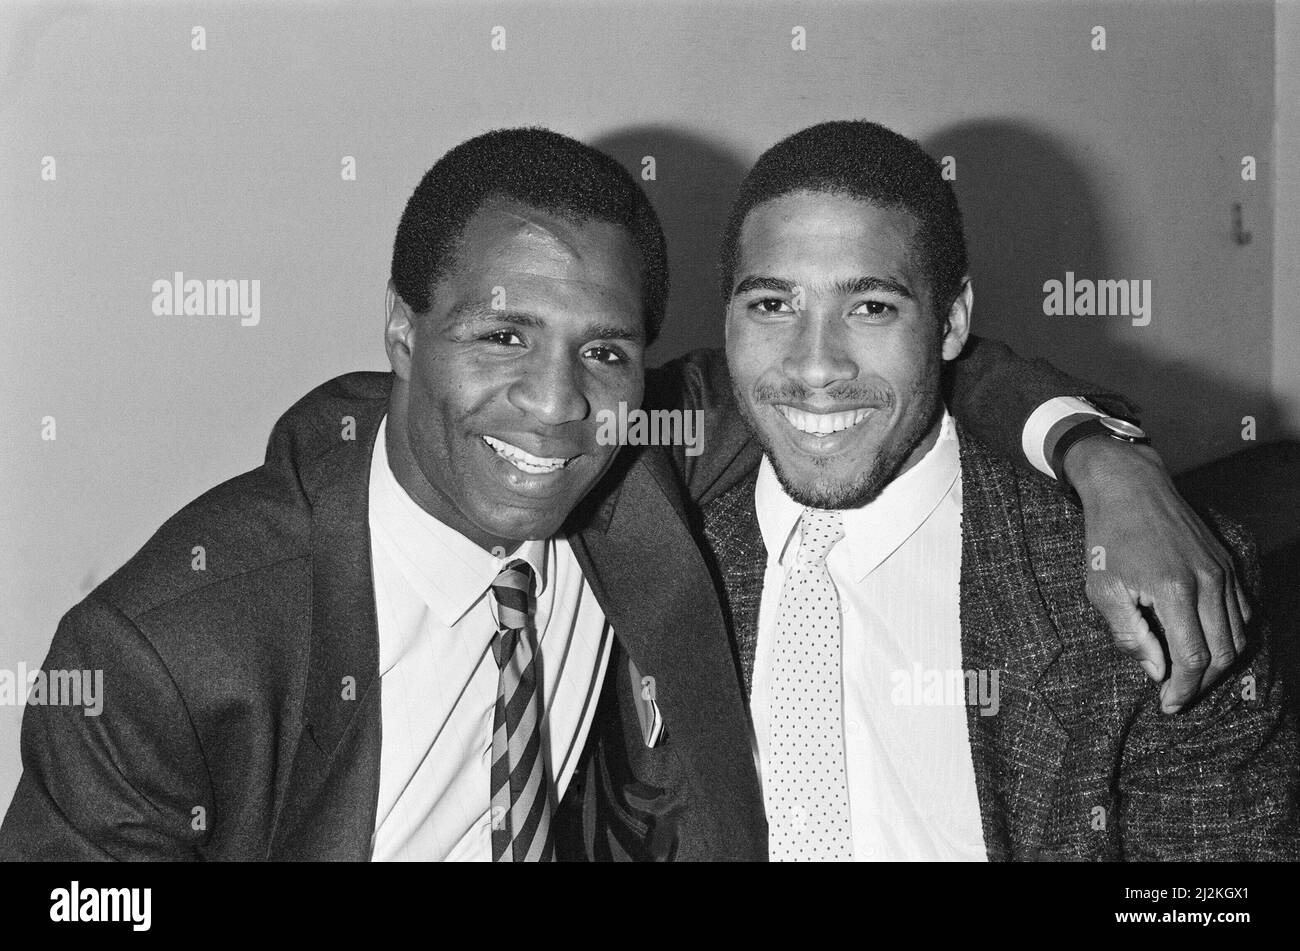 Luther Blissett, (left, in striped tie) and John Barnes (right, in plain tie) pose together in April 1987. Both are football players for Watford.  John Barnes played for Watford, 1981 to 1987. Luther Blissett had three spells for Watford, 1975 to 1983, 1984 to 1988, and 1991 to 1993  Picture taken 6th April 1987 Stock Photo